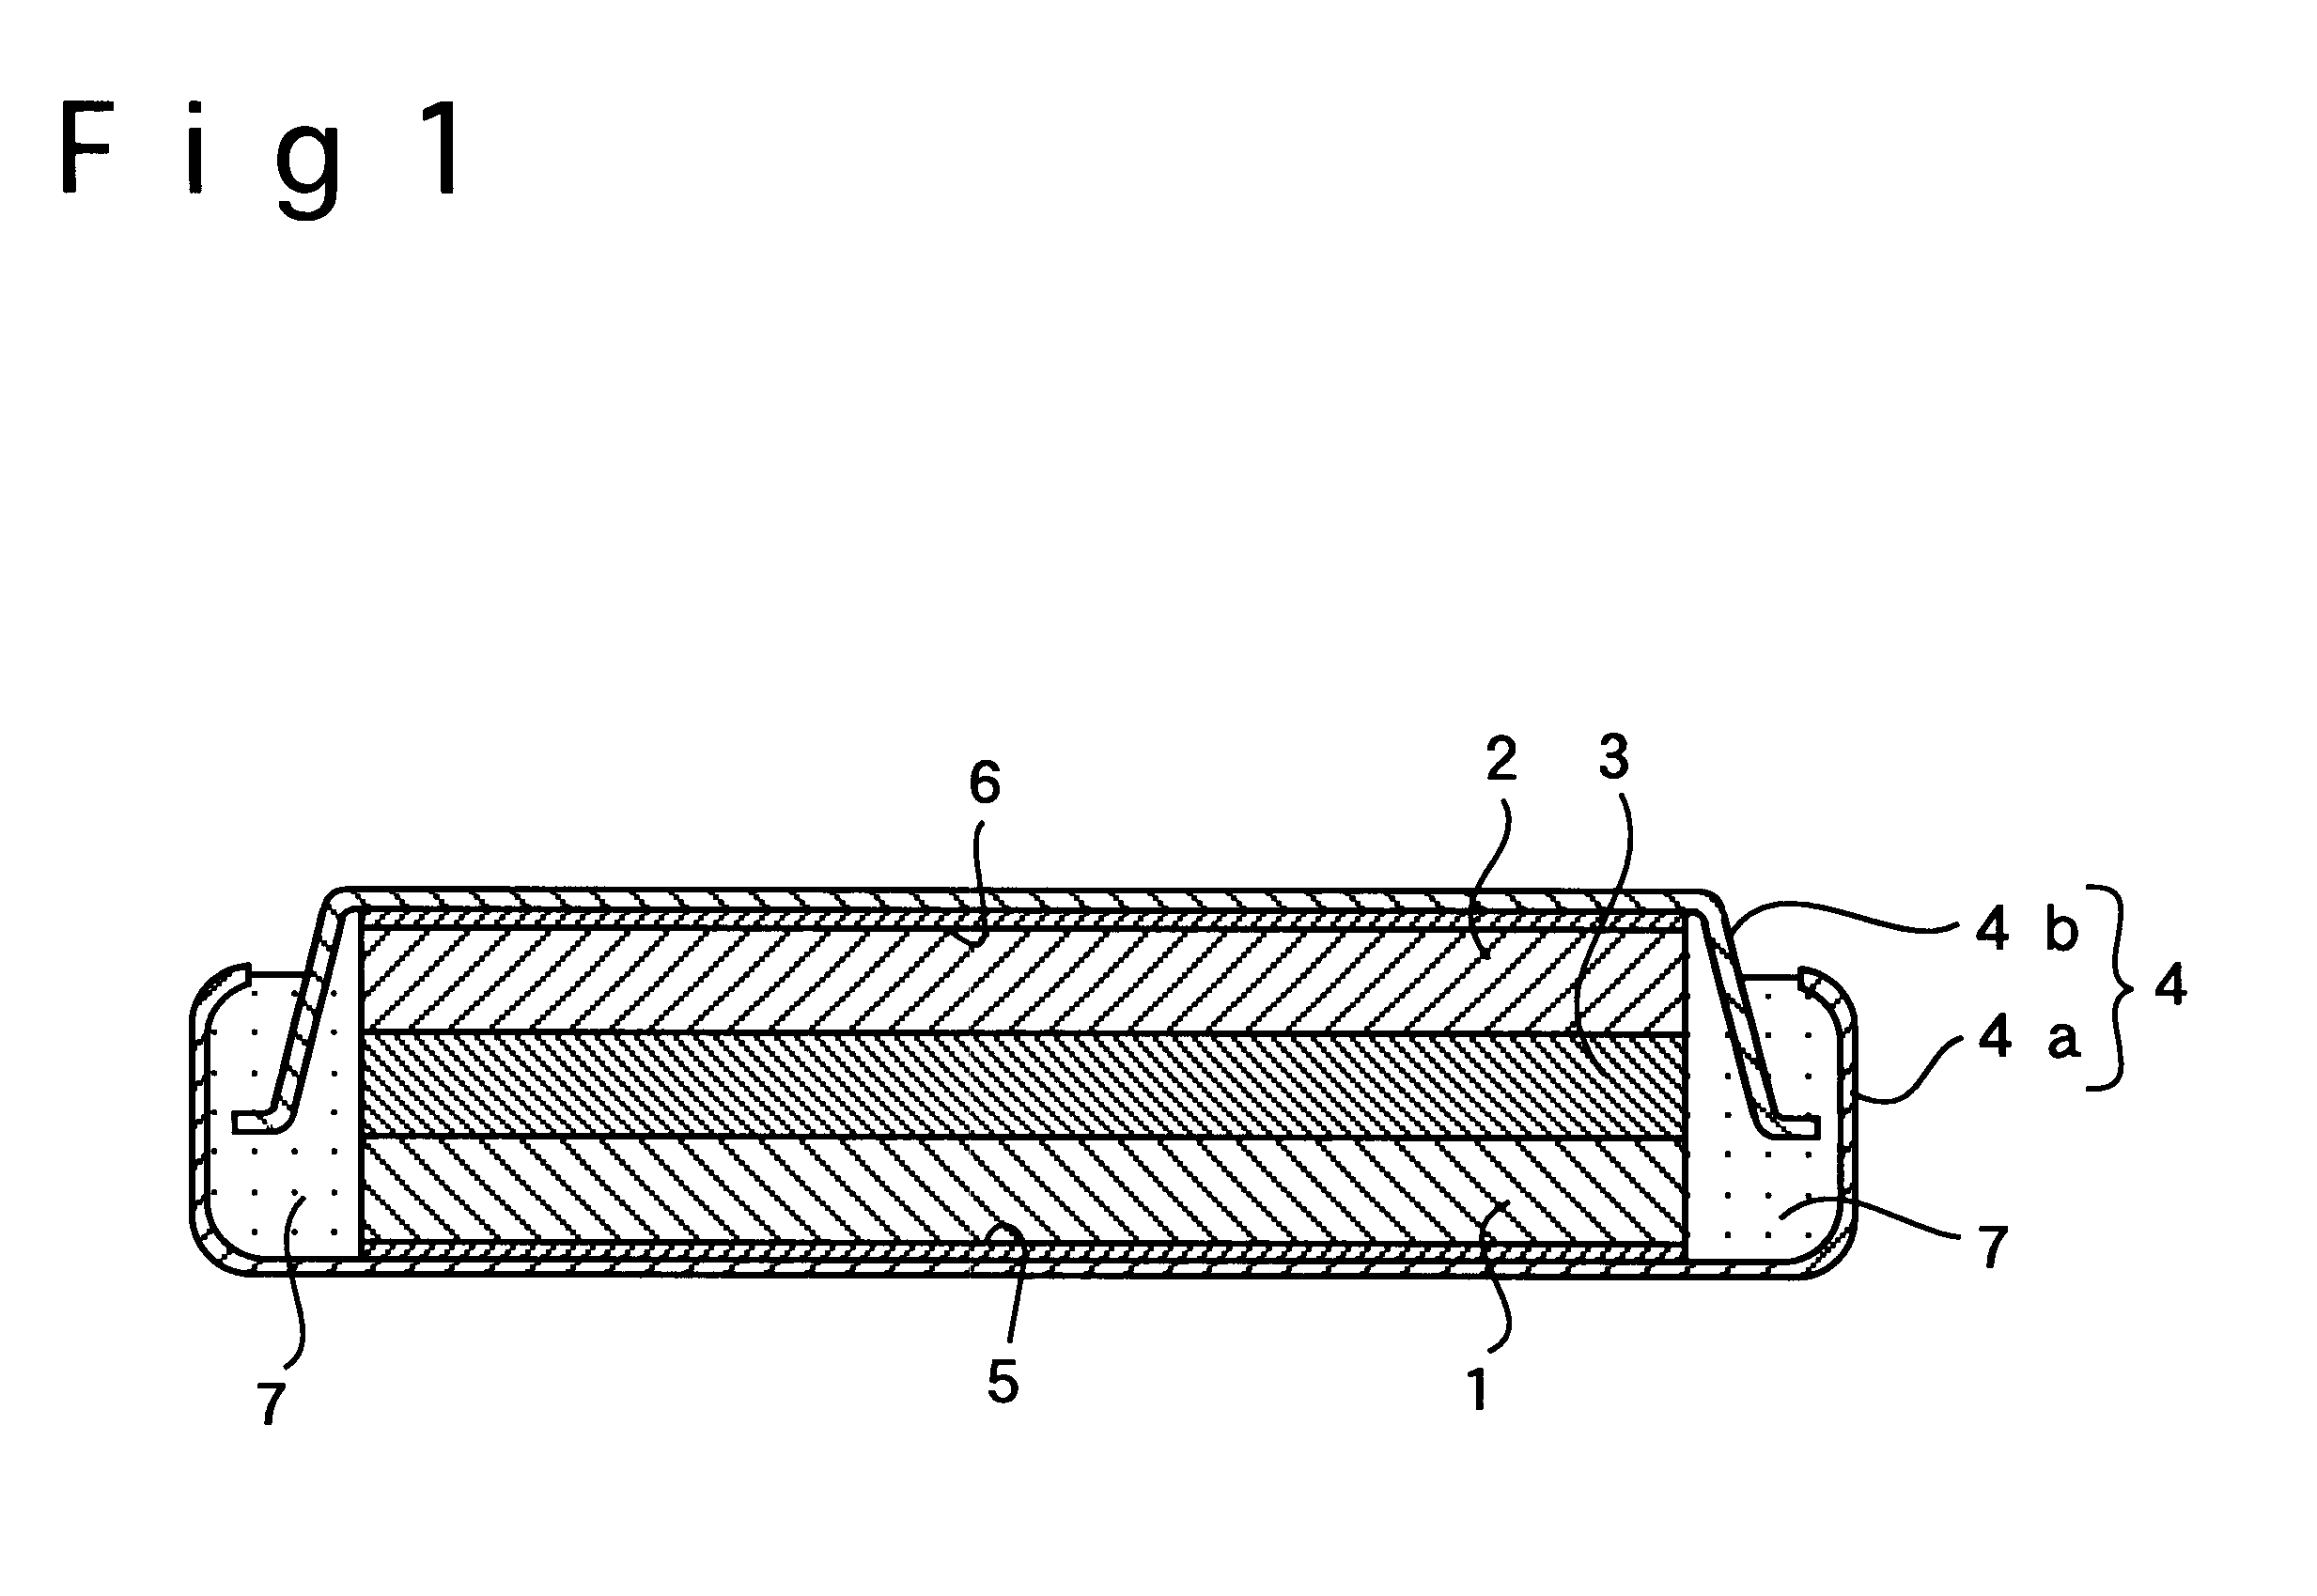 Lithium battery with boron-containing lithium-manganese complex oxide cathode material